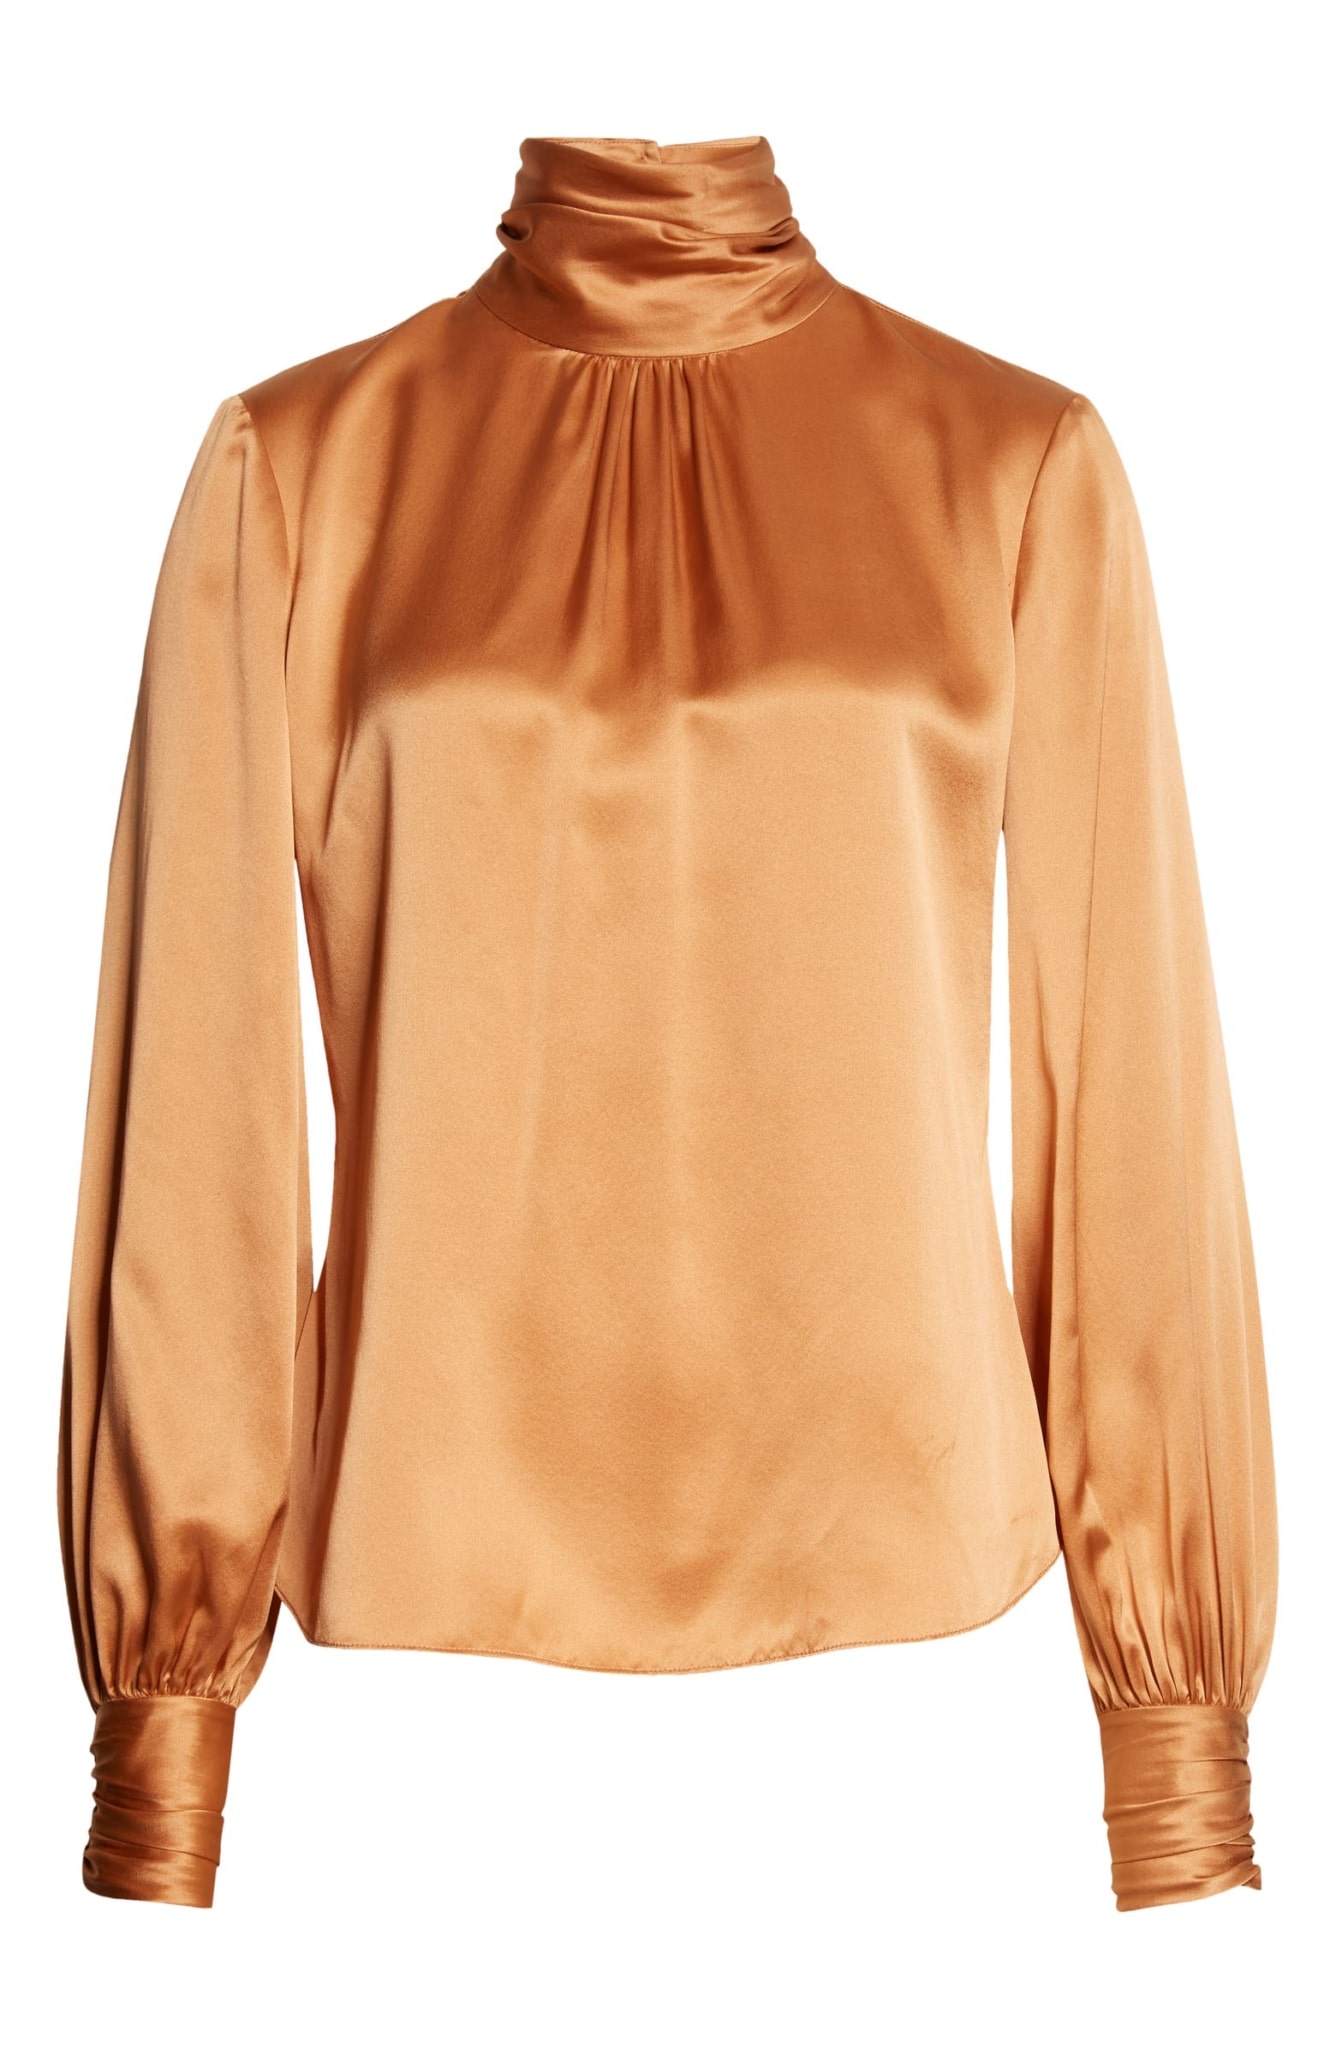 Statement blouses - Nordstrom - silk blouse - fashions - clothing